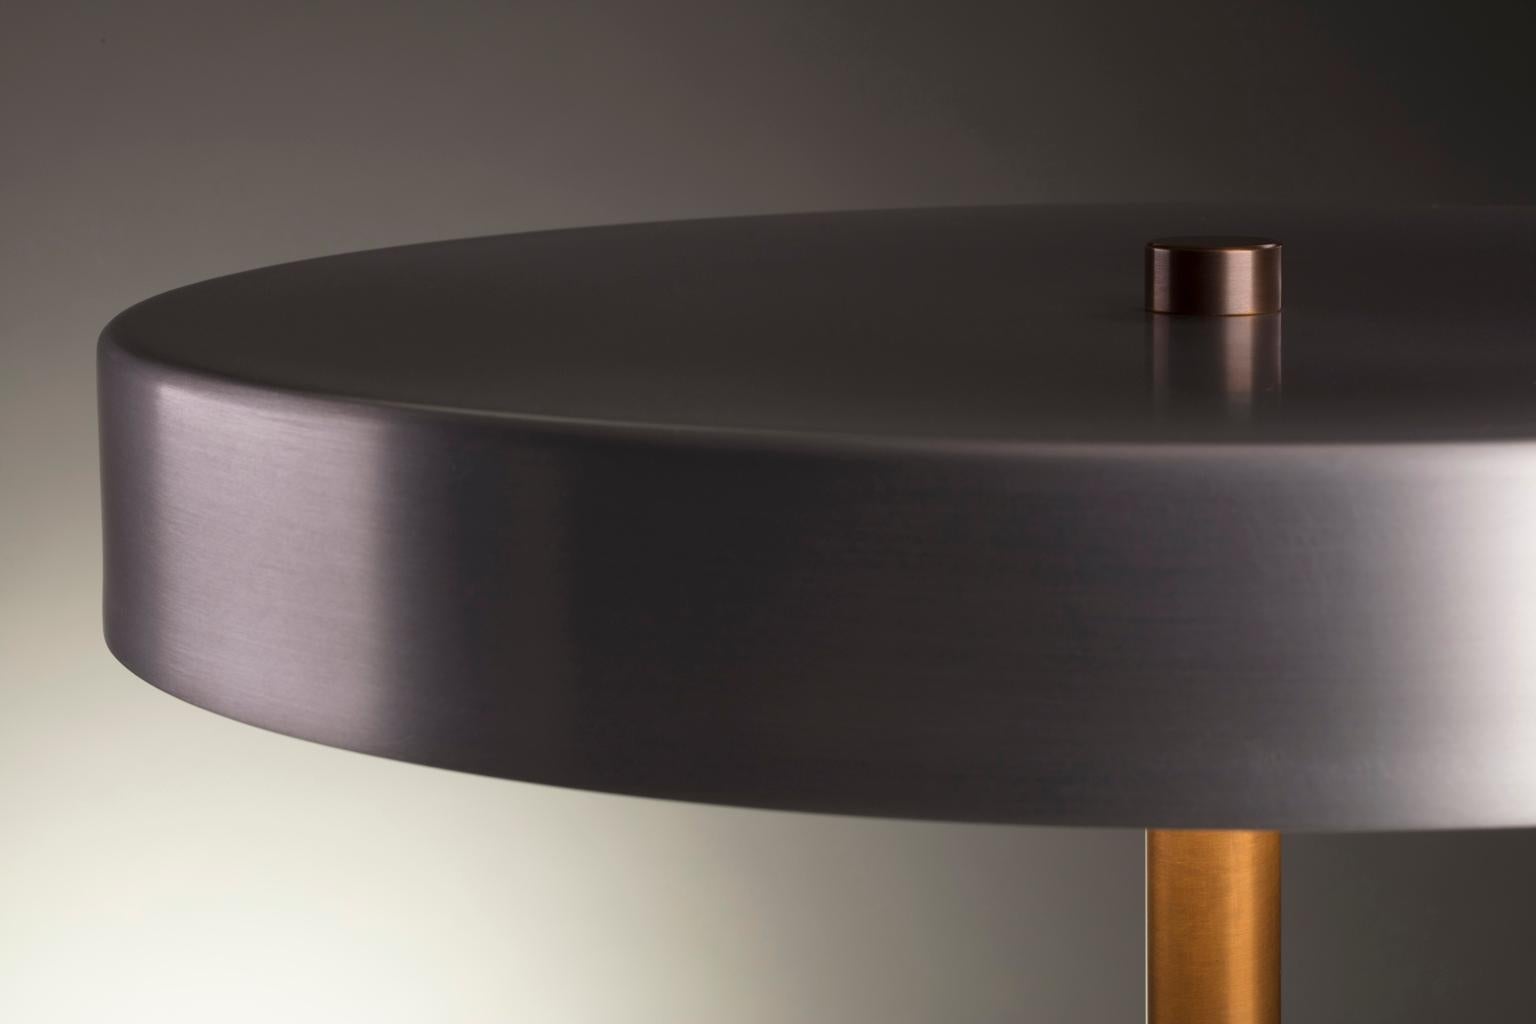 Collection I: Disc lamp in burnished aluminum.

Available in a matte black or softly burnished finish, the shade of the disc lamp can either fade into its surroundings or catch light to emphasize its refined form.

The integrated dimmable LED